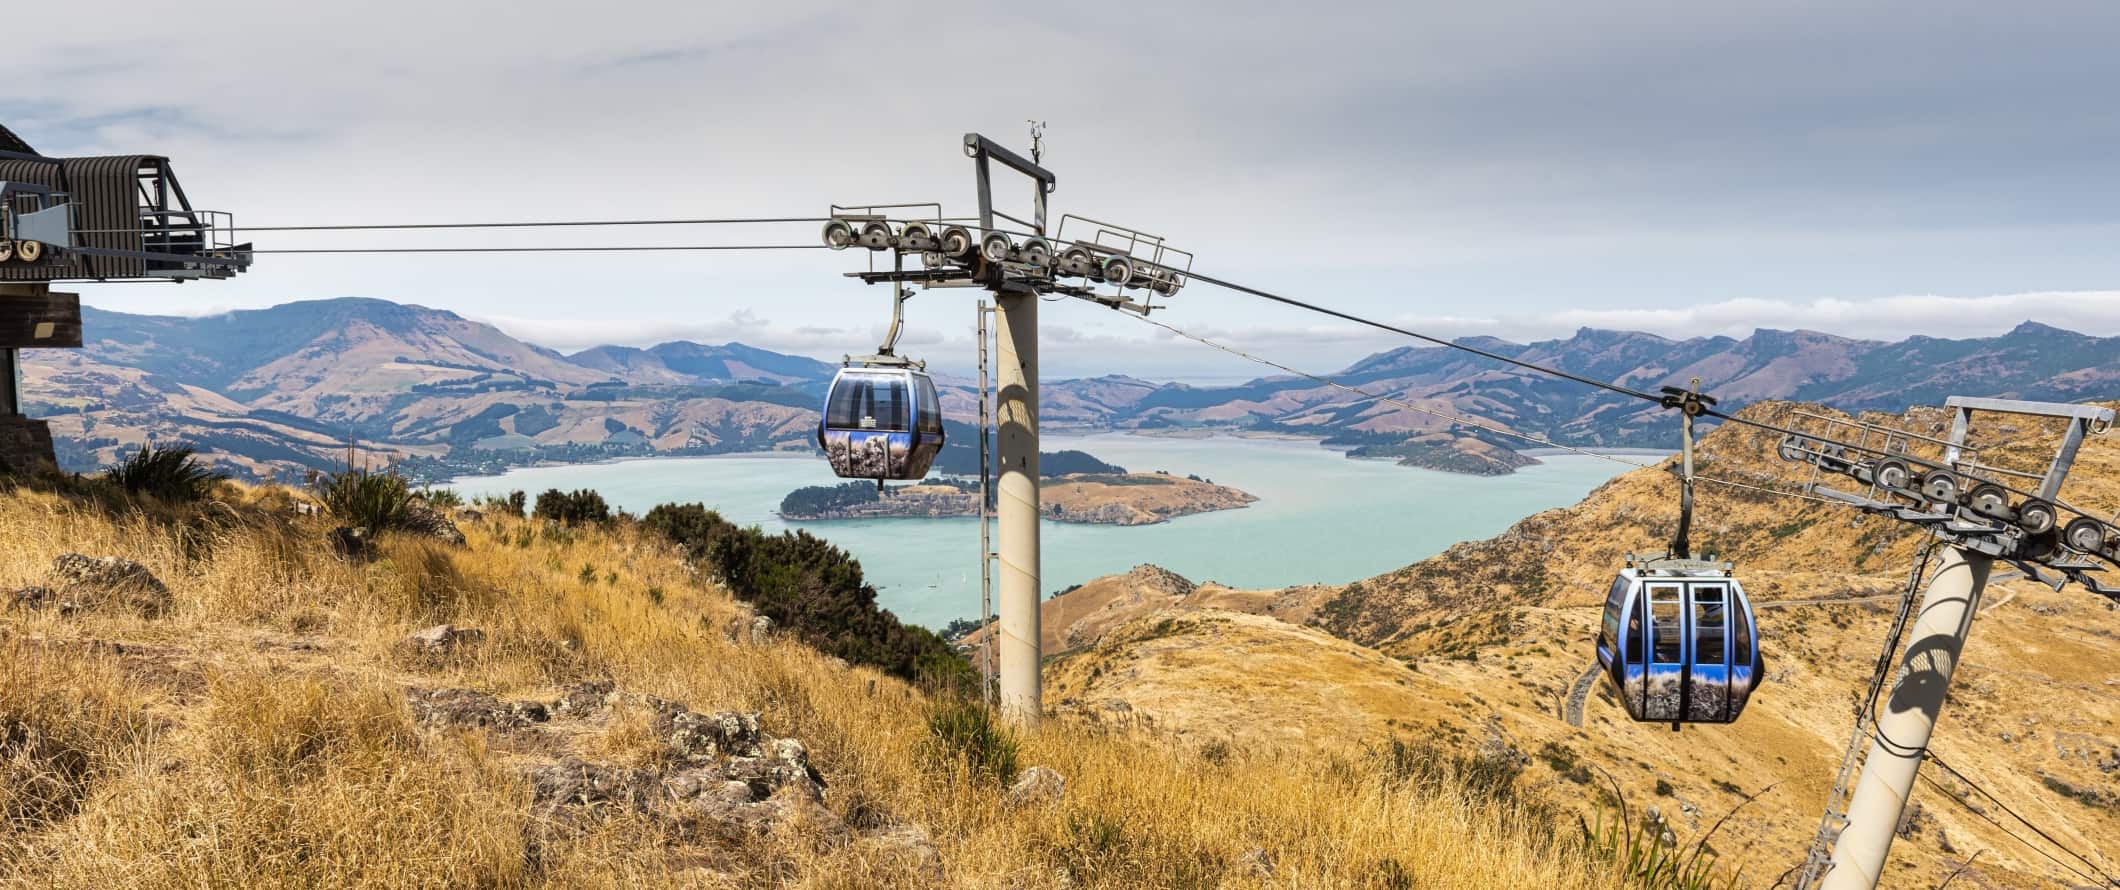 Gondolas with panoramic views of mountains and a large inlet in the background, in Christchurch, New Zealand.